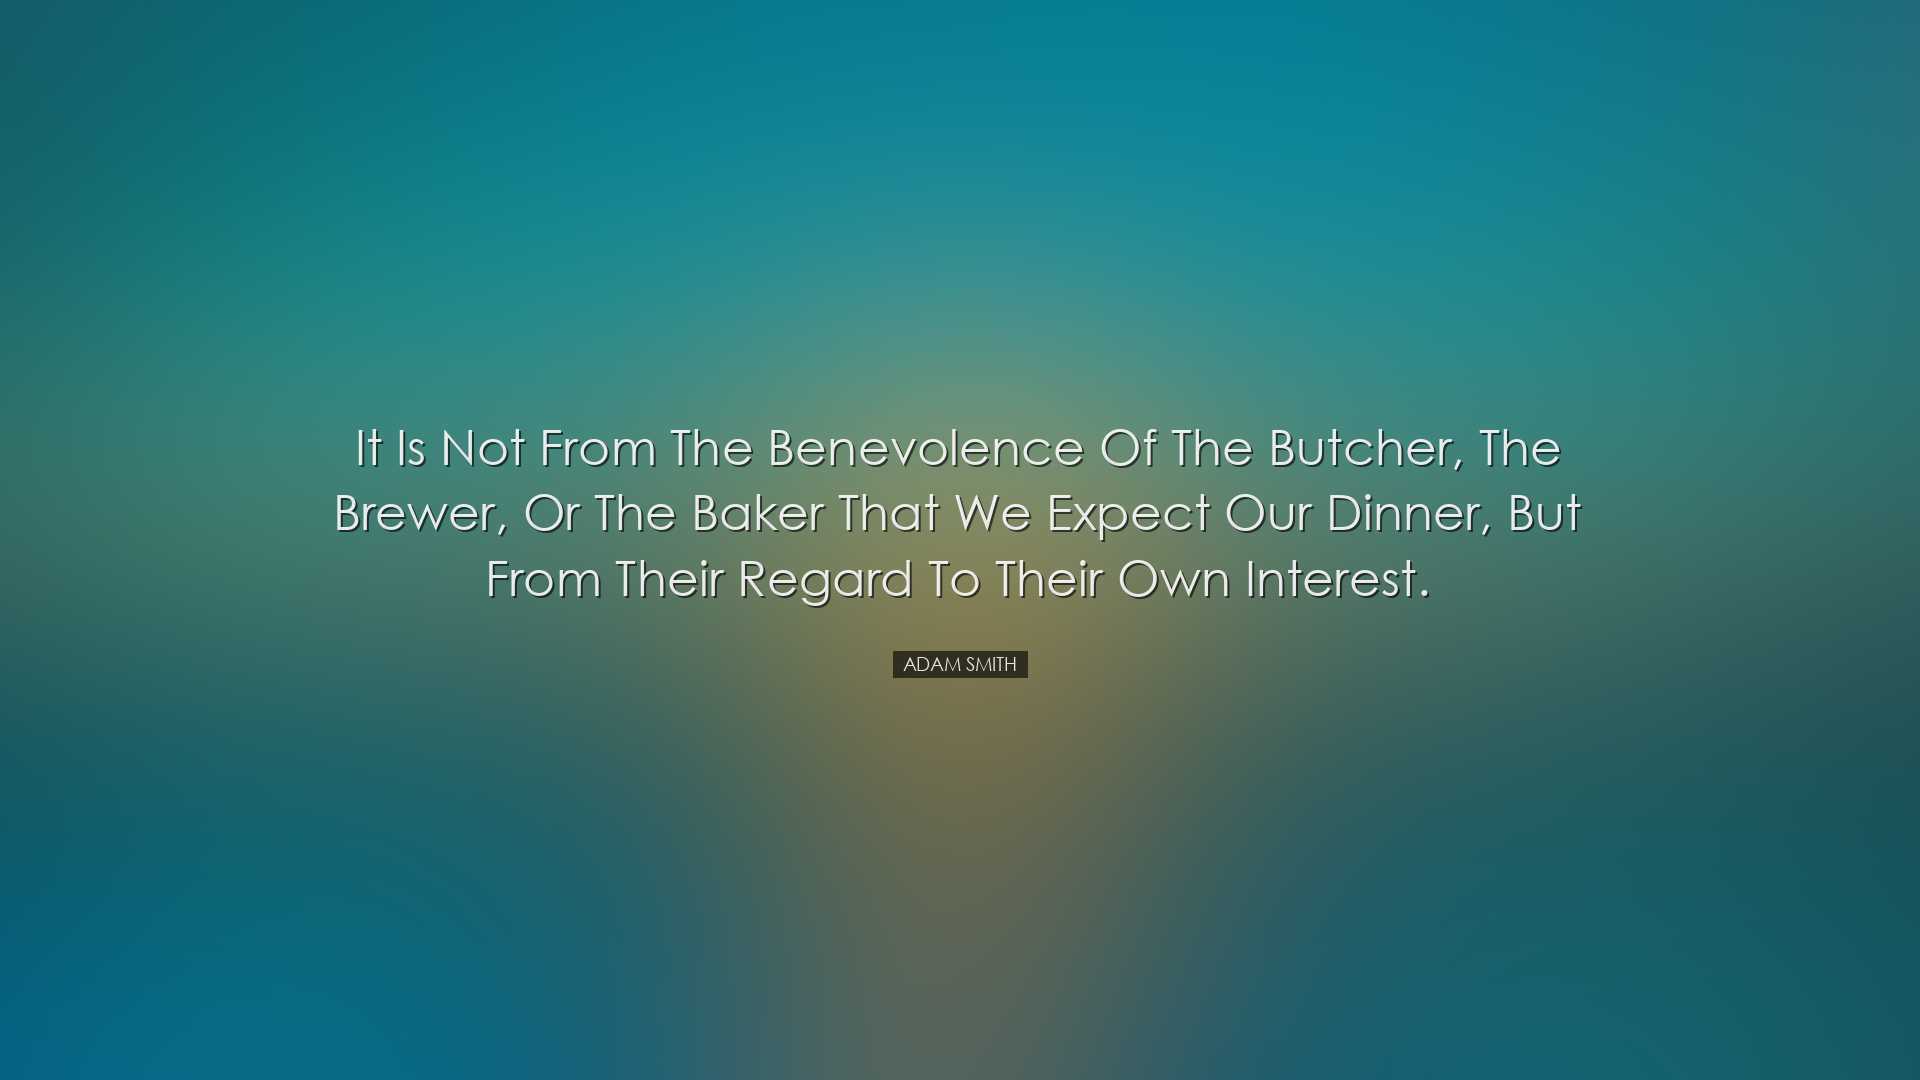 It is not from the benevolence of the butcher, the brewer, or the